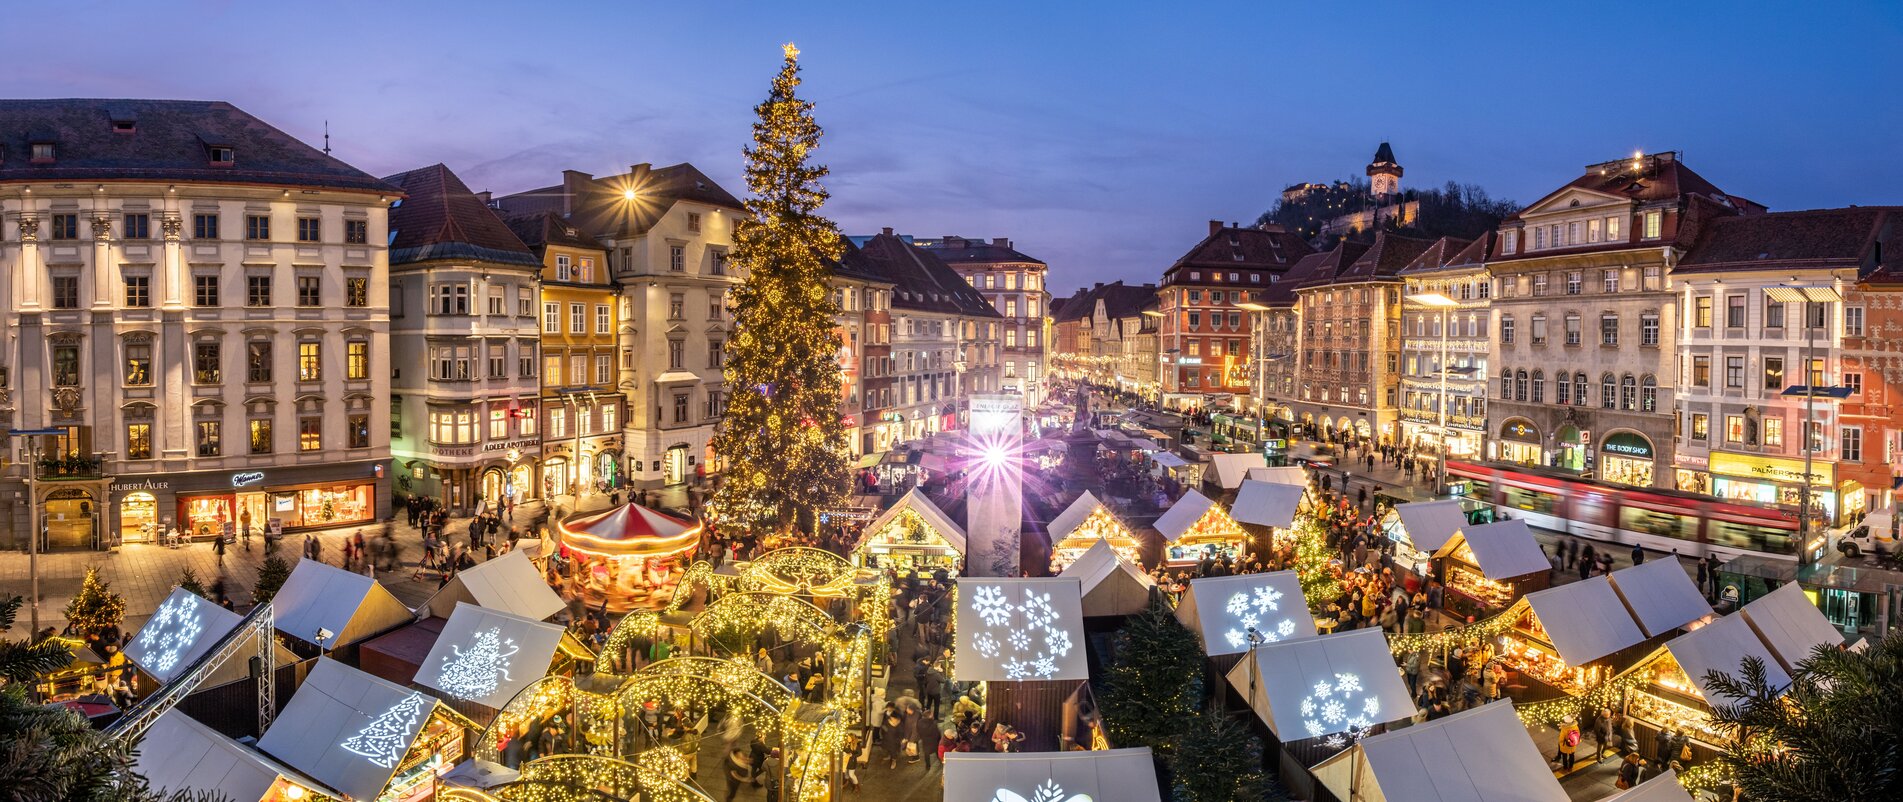 Christmas market on Hauptplatz square in front of the town hall | © Rene Walter